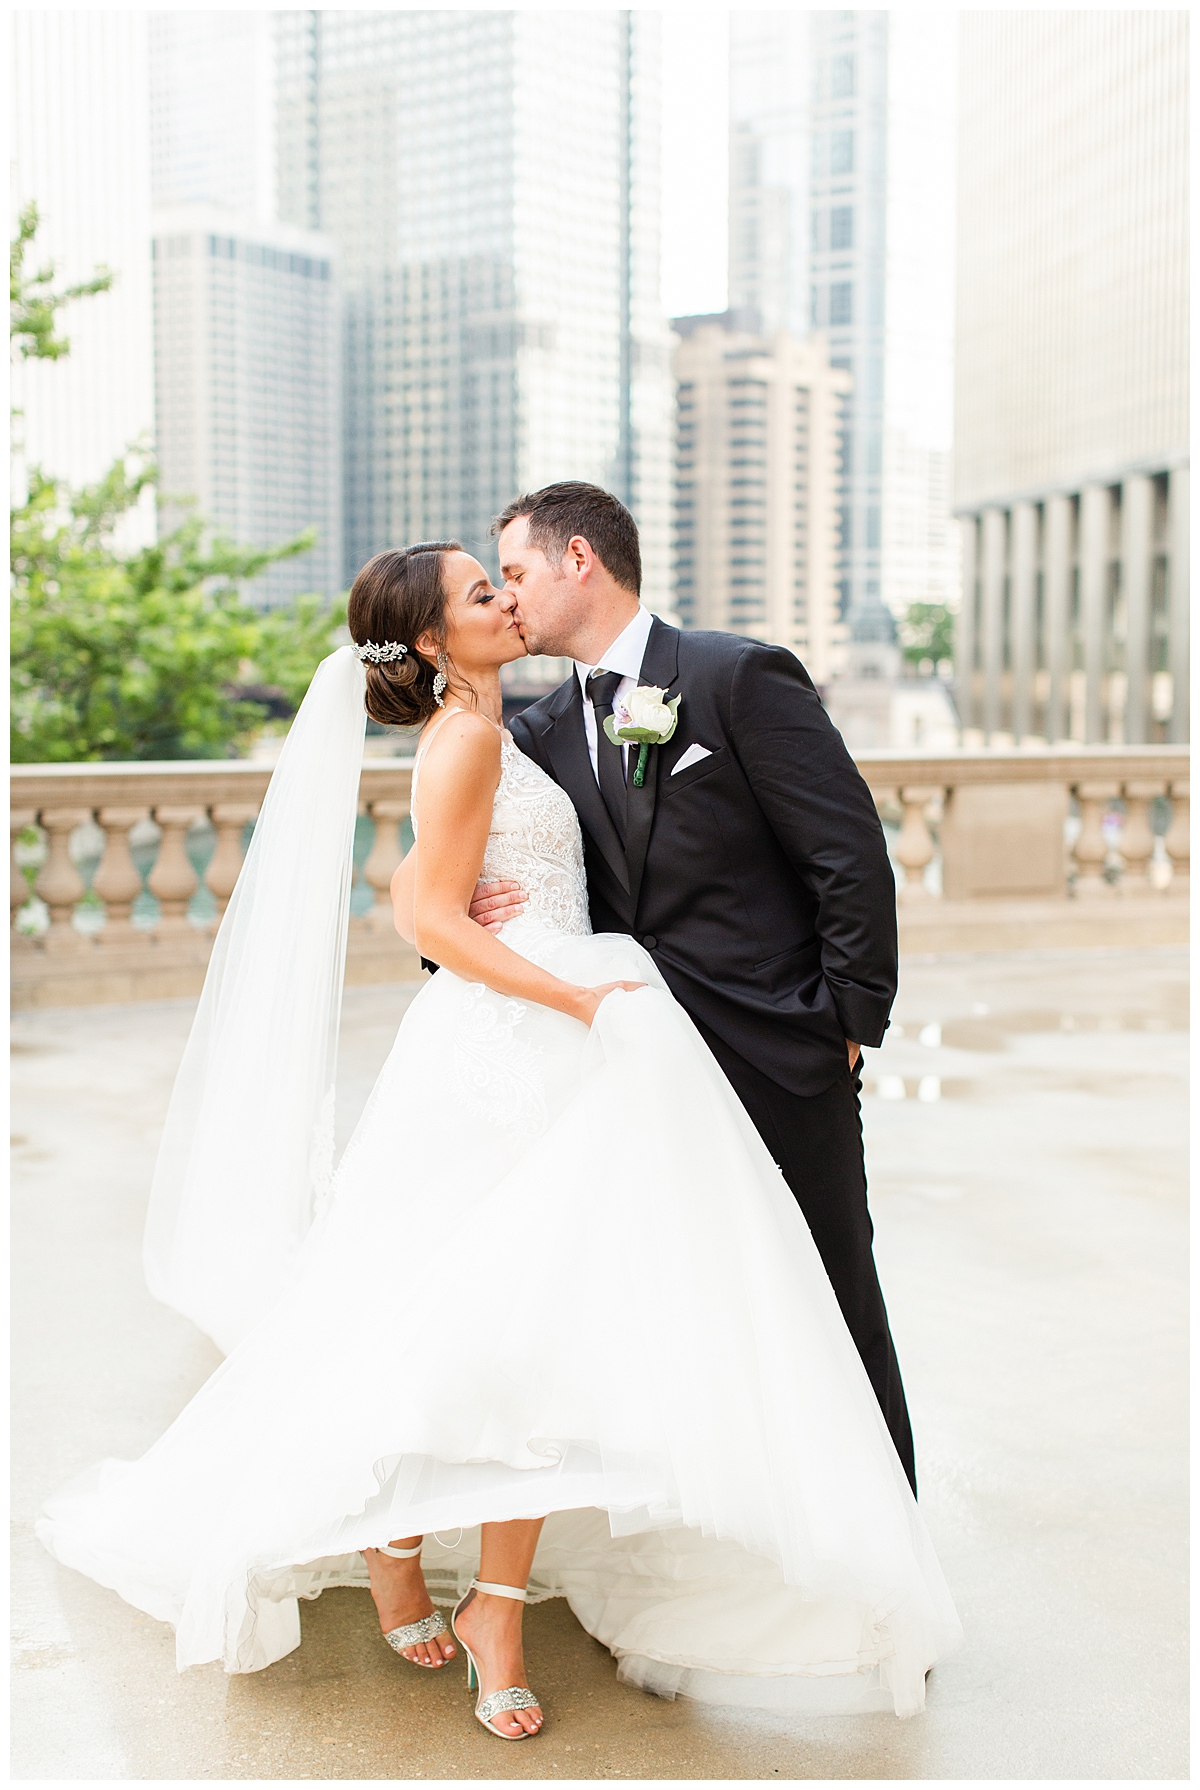 A bride and groom kiss in a wedding portrait at the Wrigley Building in Chicago.